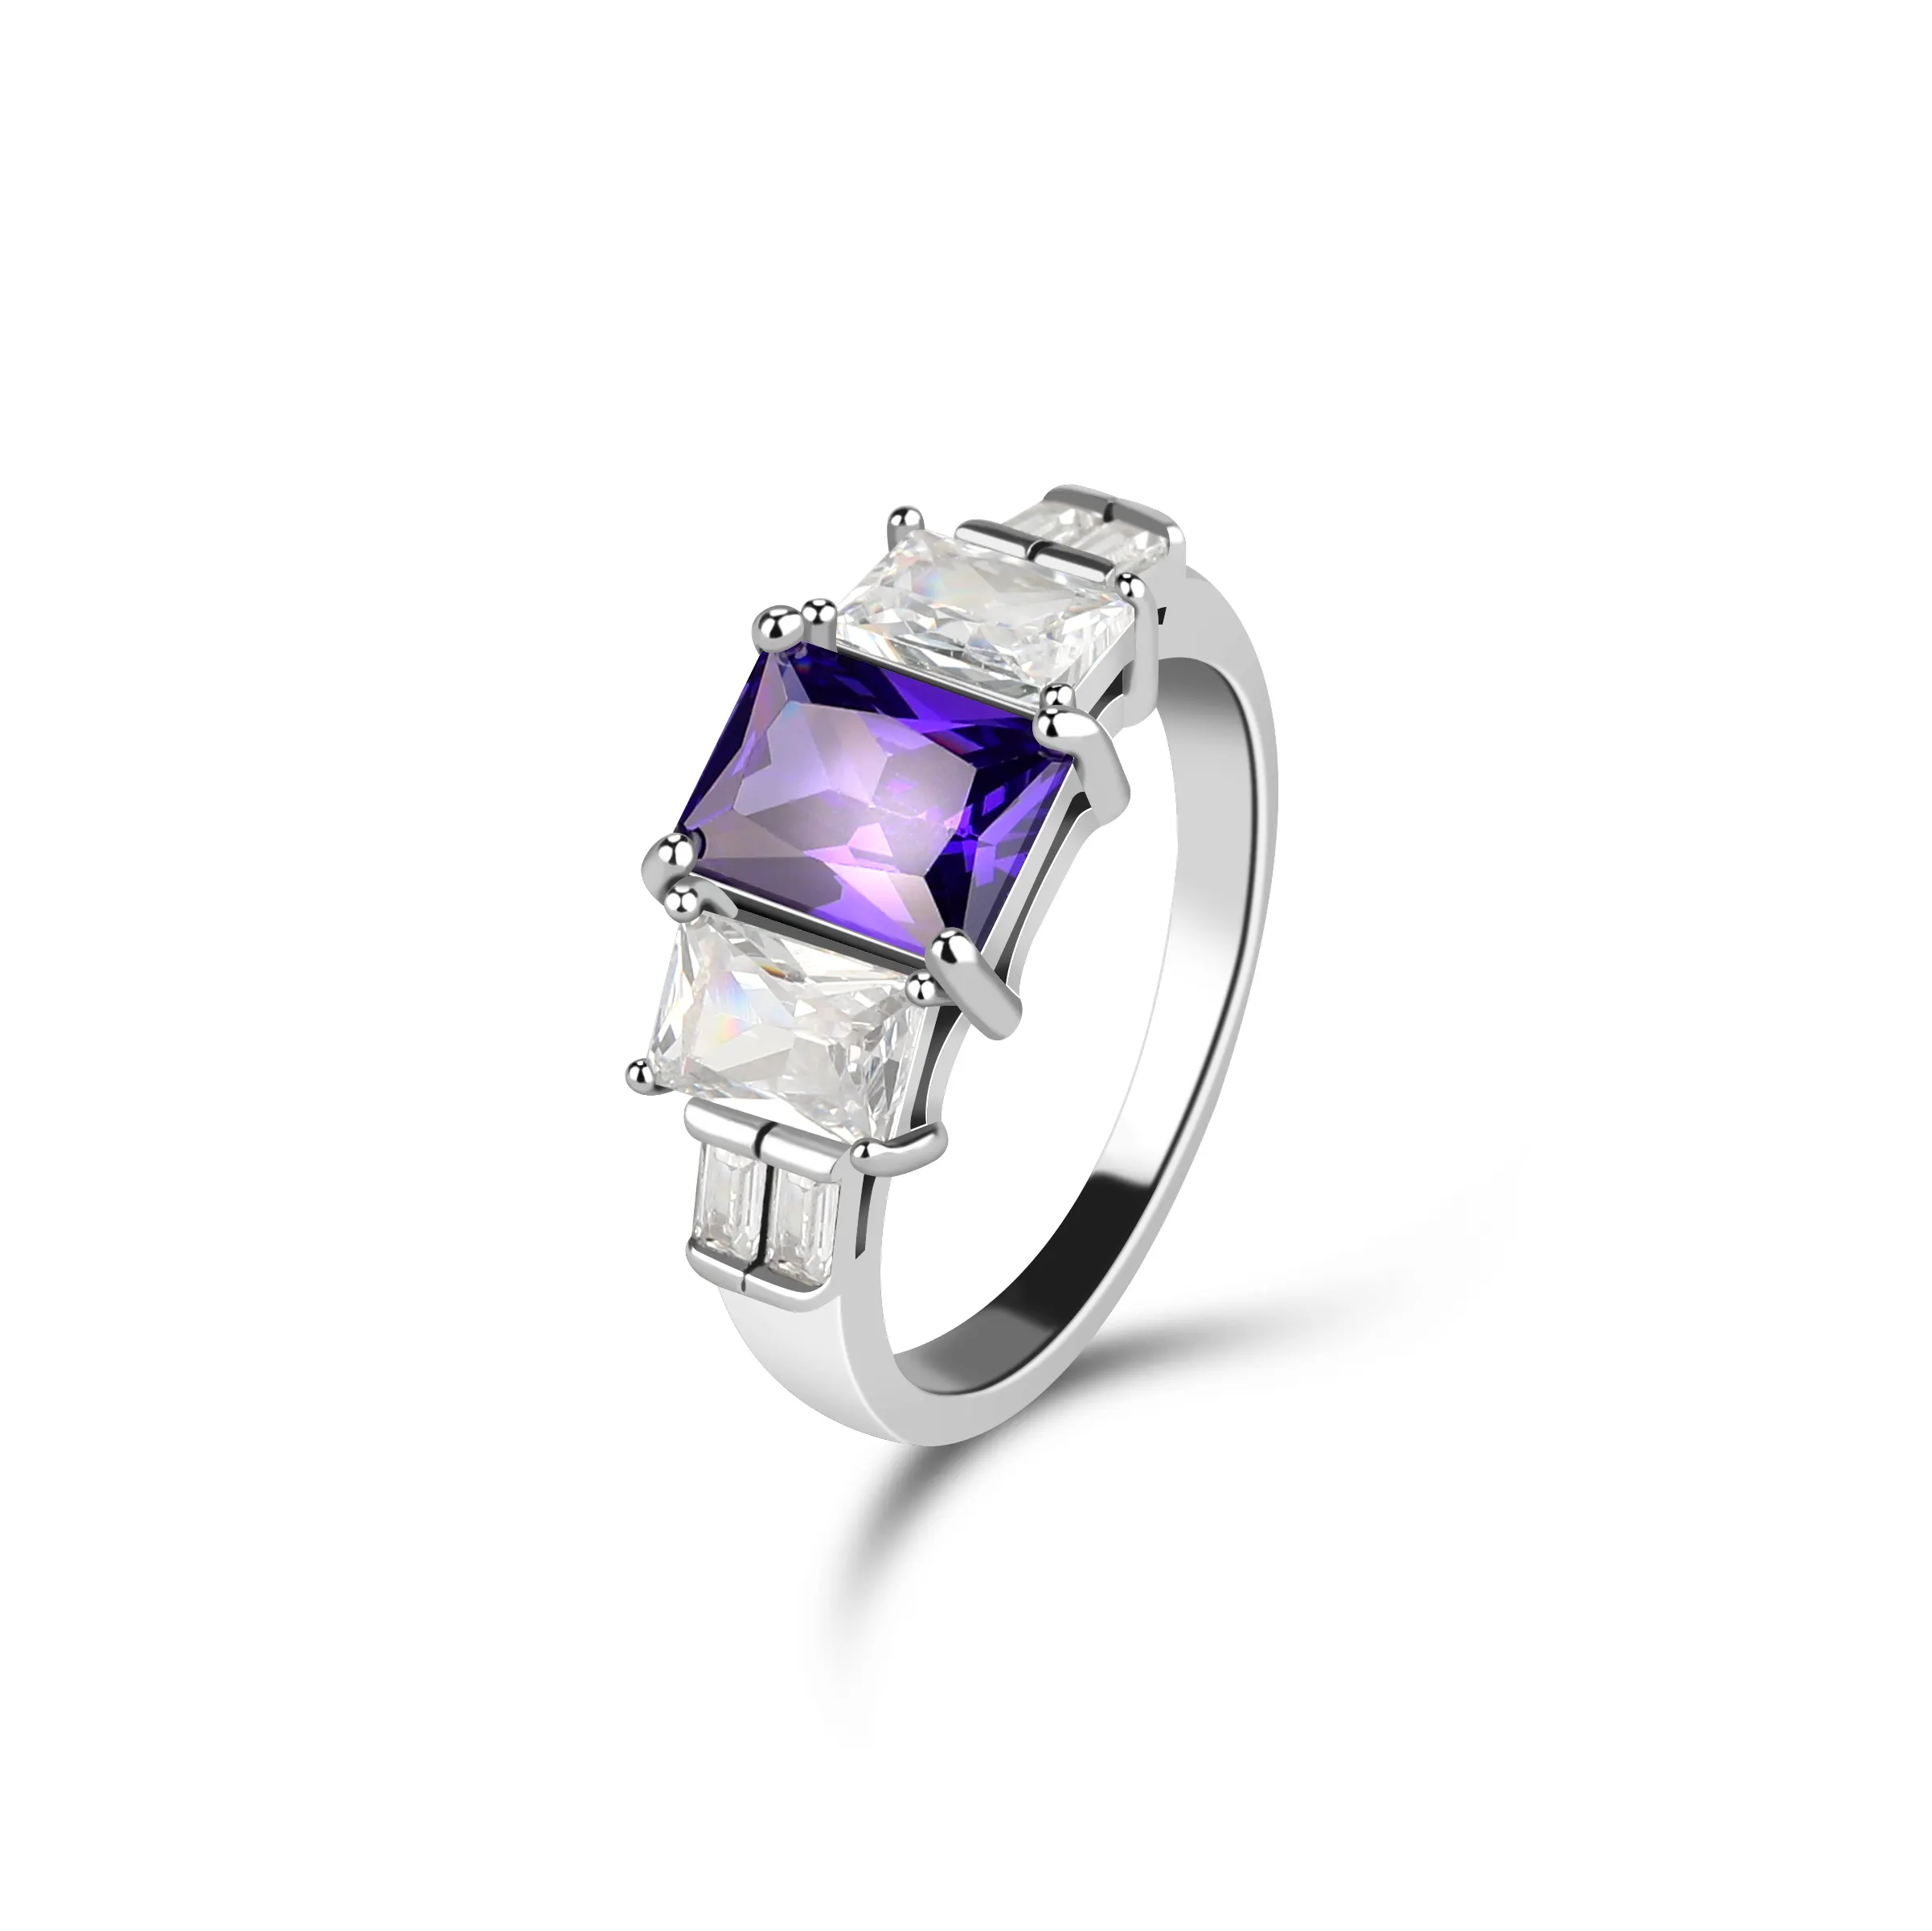 Mascot china cubic zircon ring transparent colorful stone woman silver ring 925 sterling silver ring